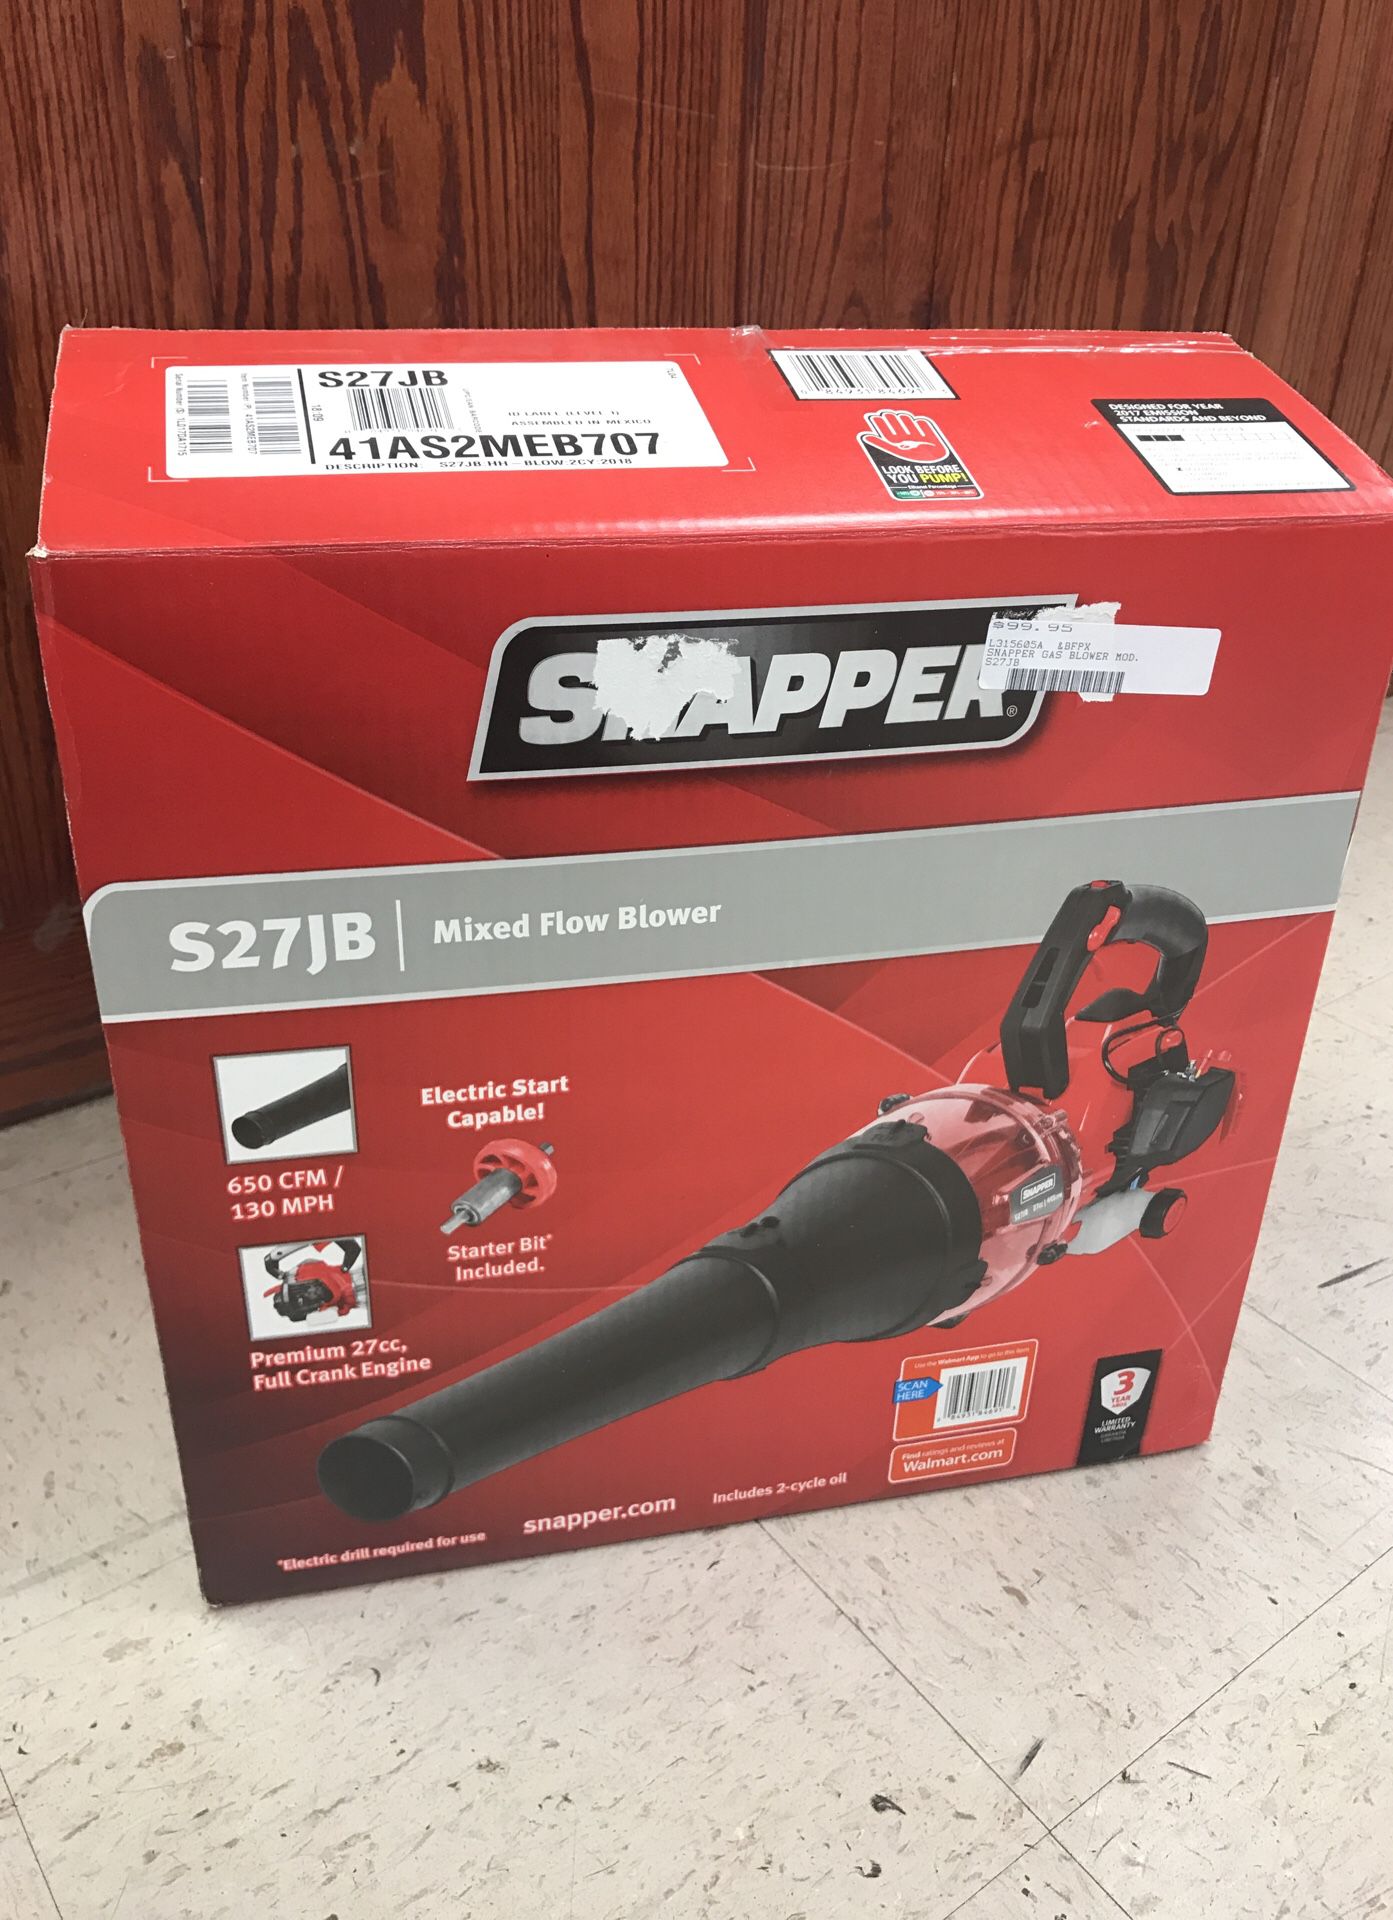 Snapper gas blower s27jb leaf mixed gas blower new